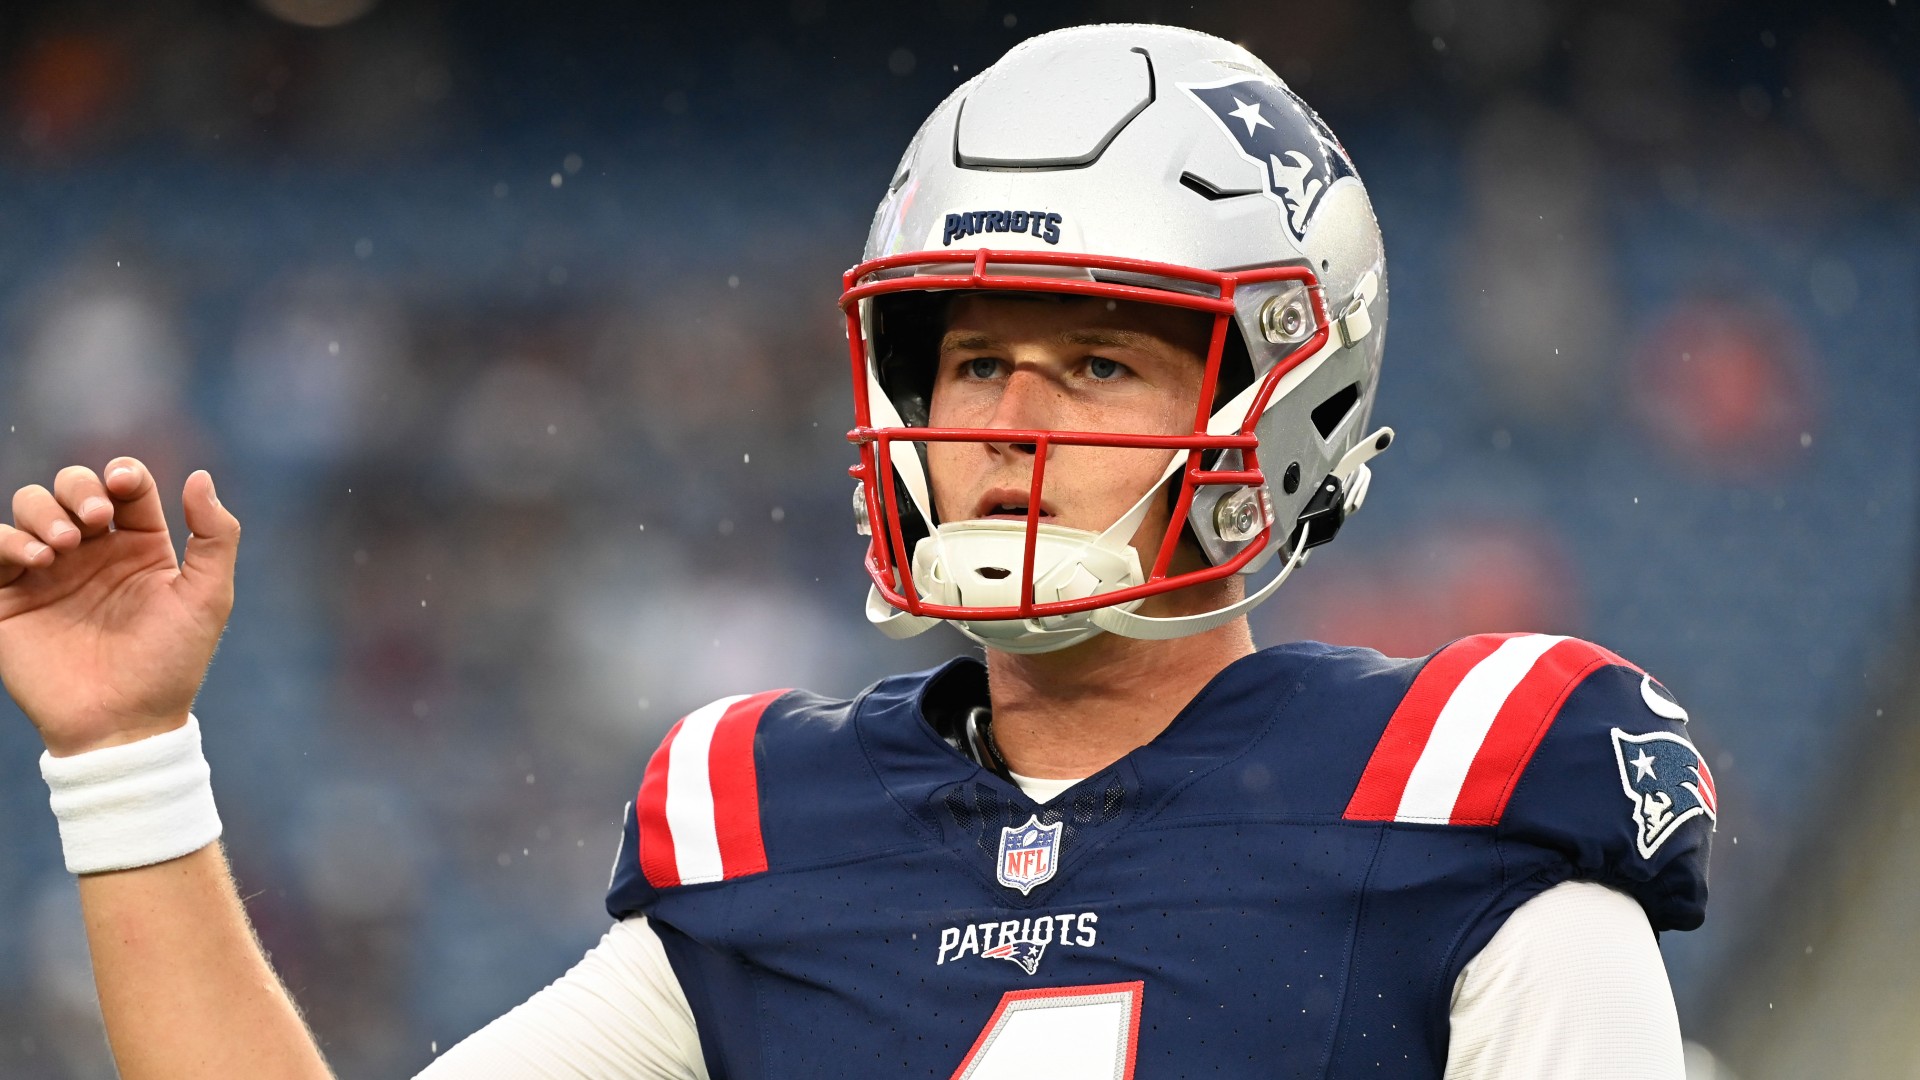 Patriots Signed Two Quarterbacks To Their Practice Squad Today